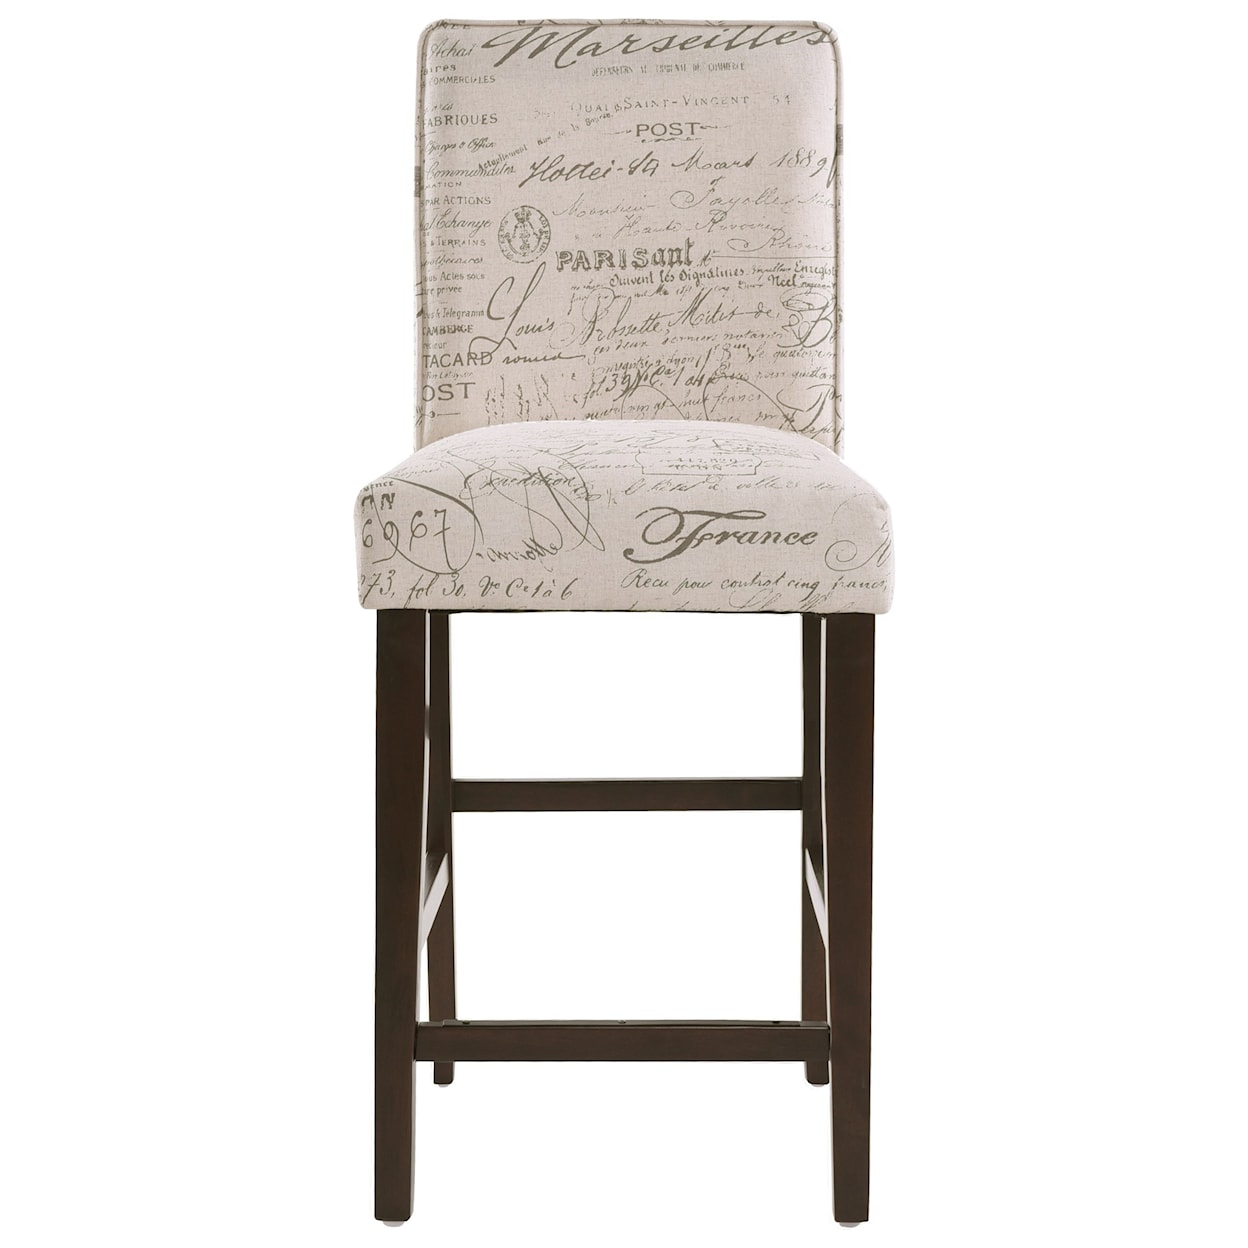 Accentrics Home Accent Seating Barstool